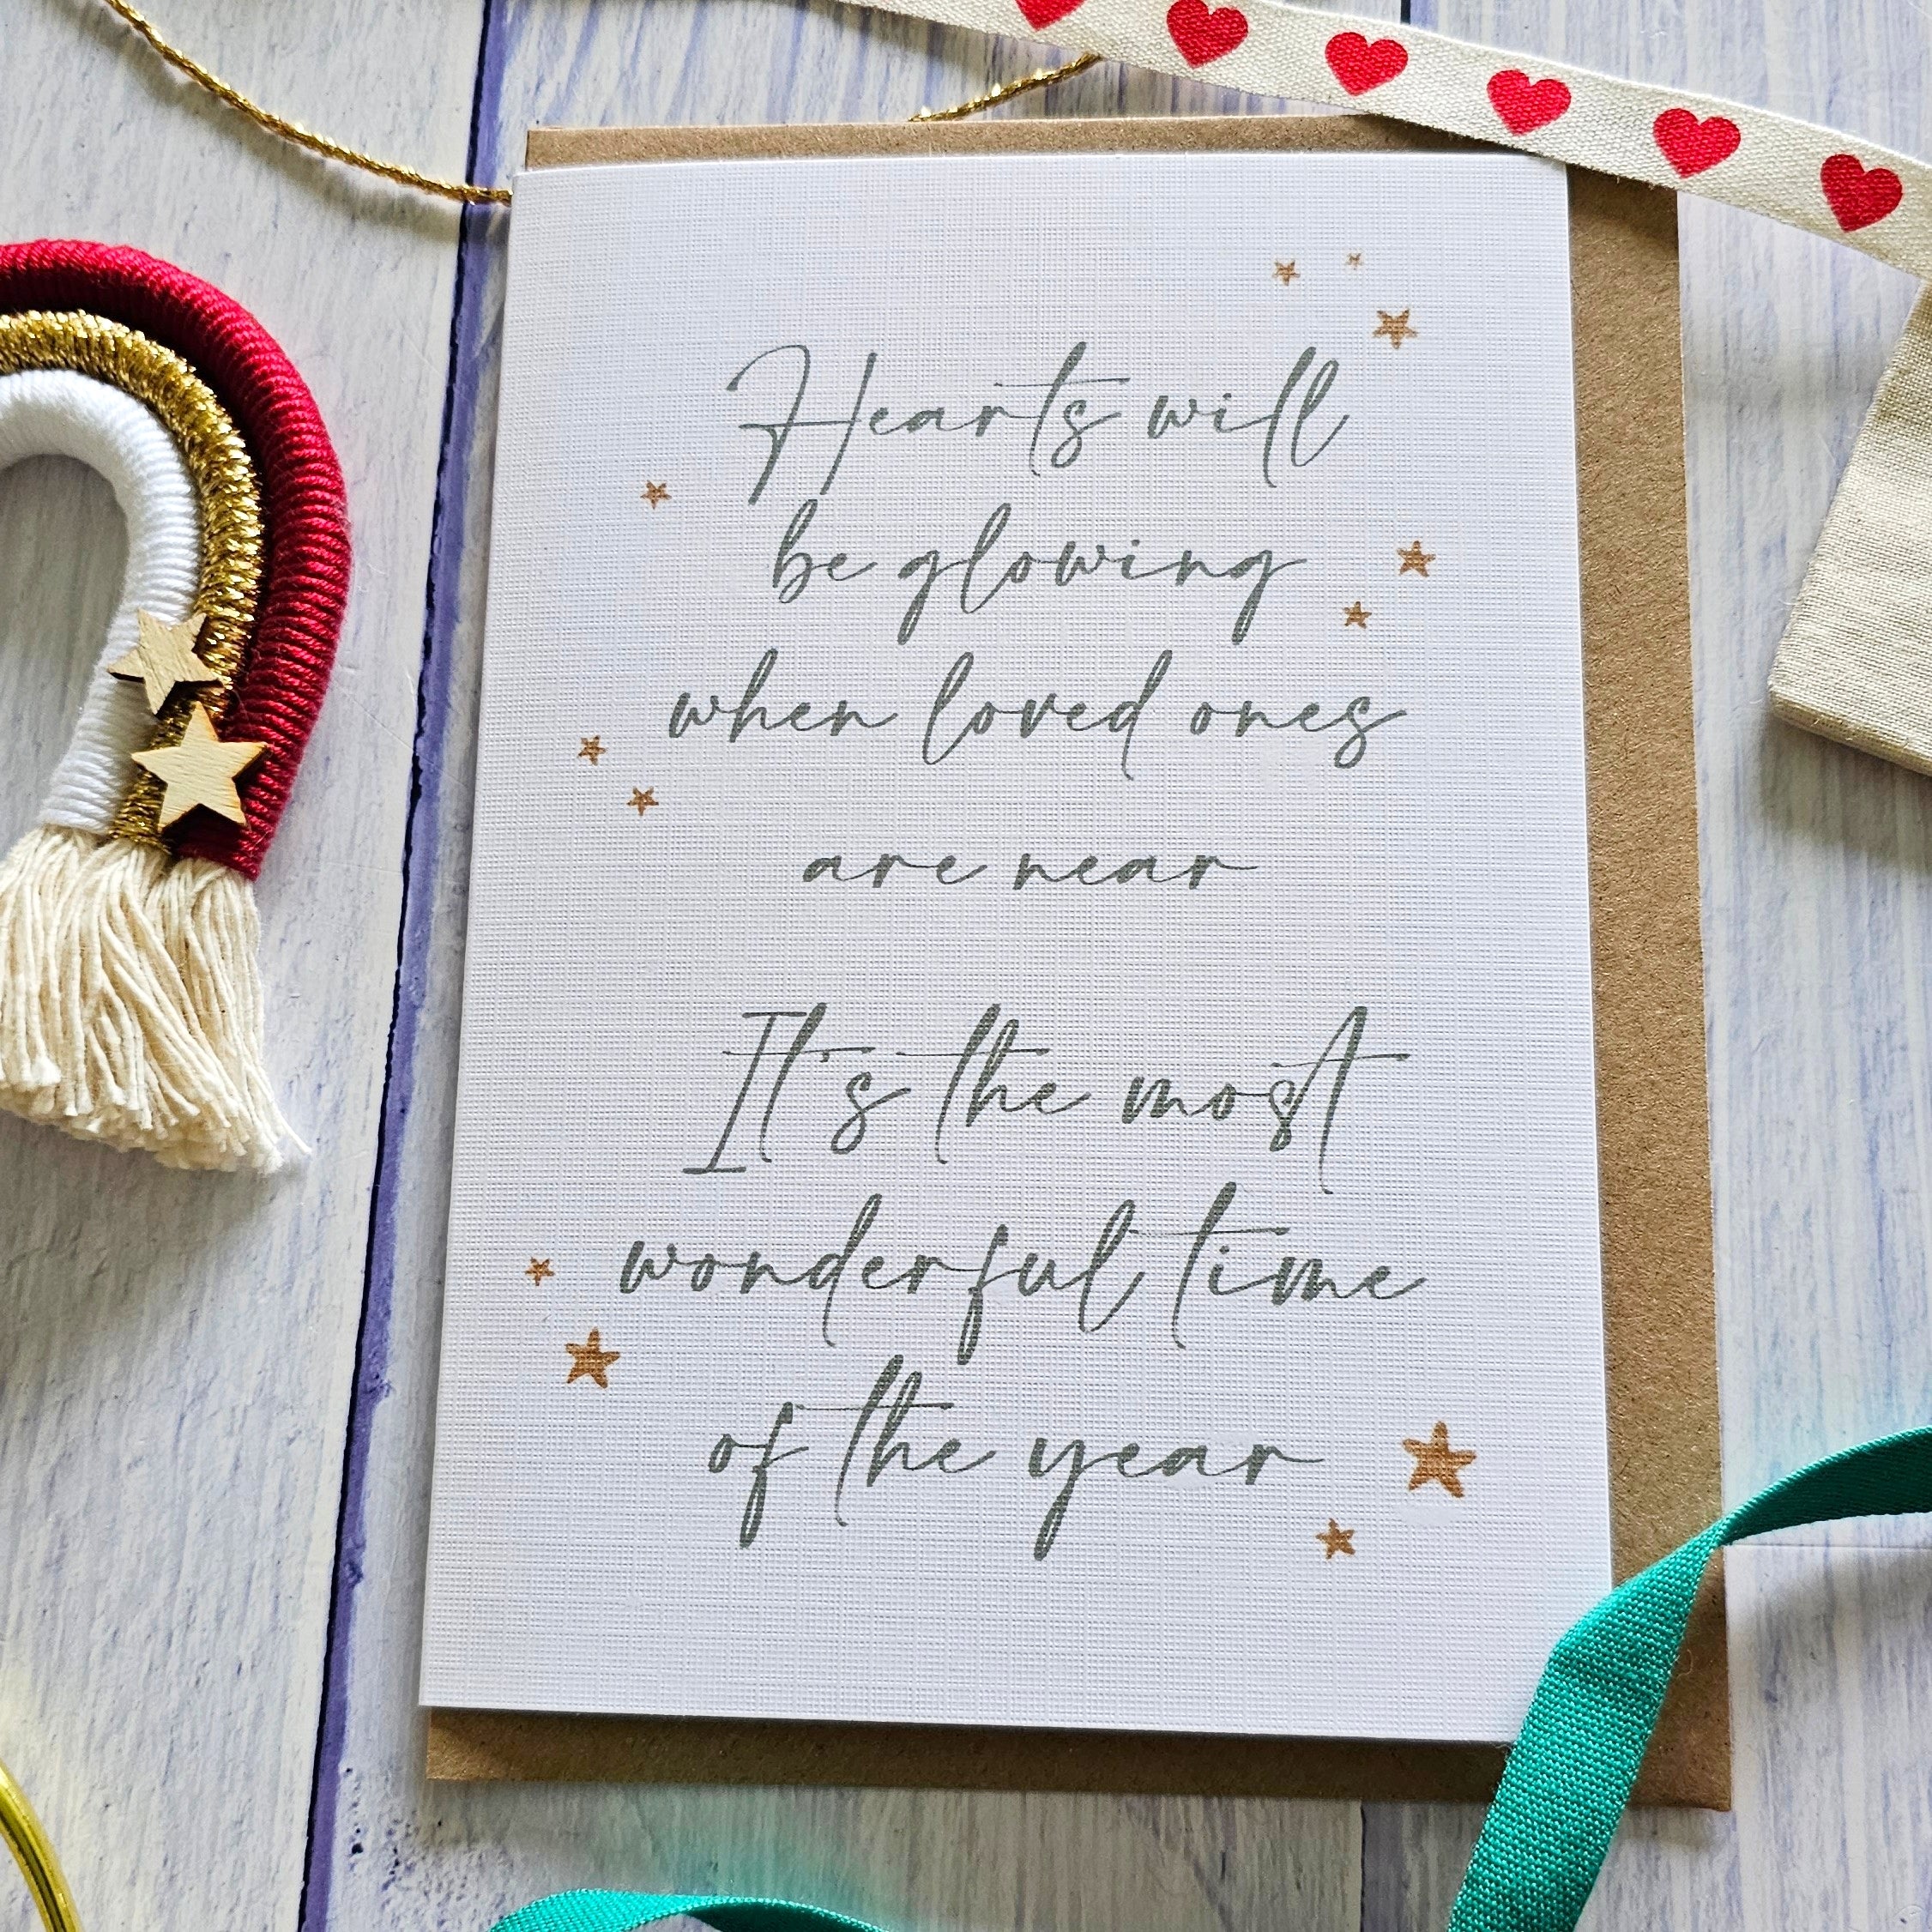 The Most Wonderful Time - Christmas Card